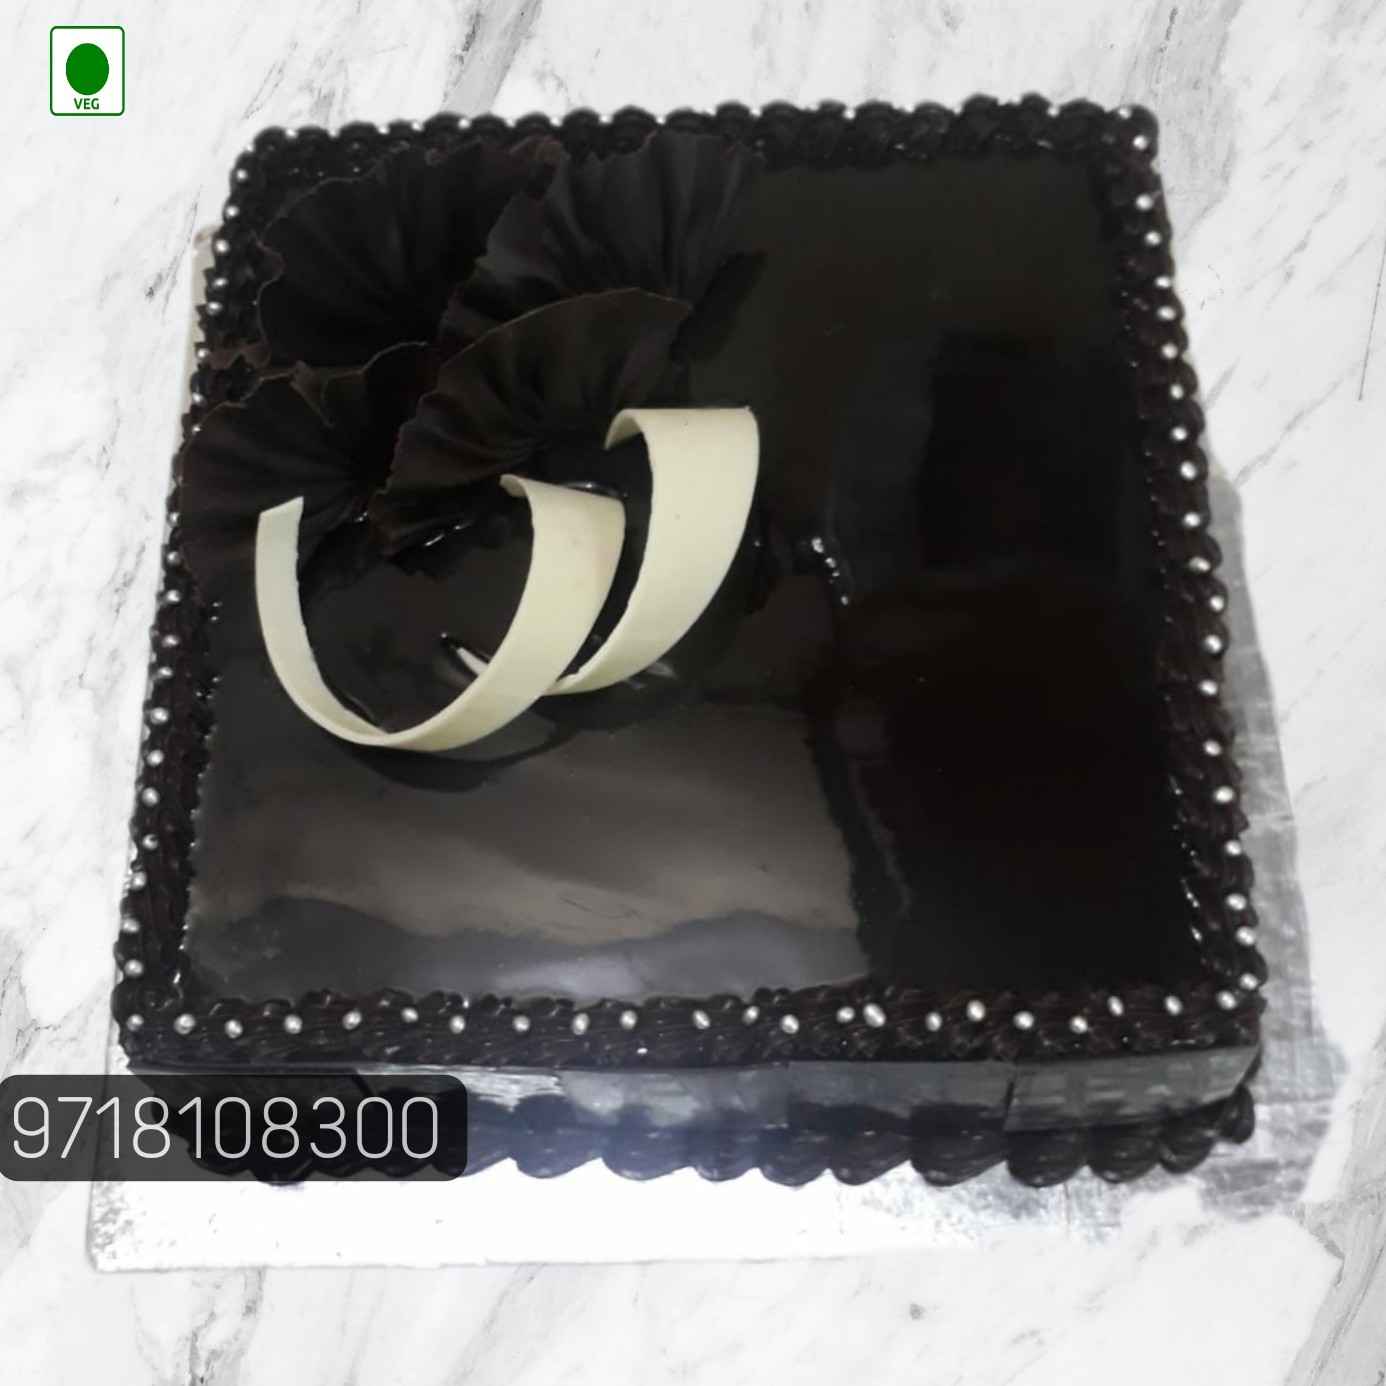 Square Black Forest Cake  Magic Bakers Delicious Cakes